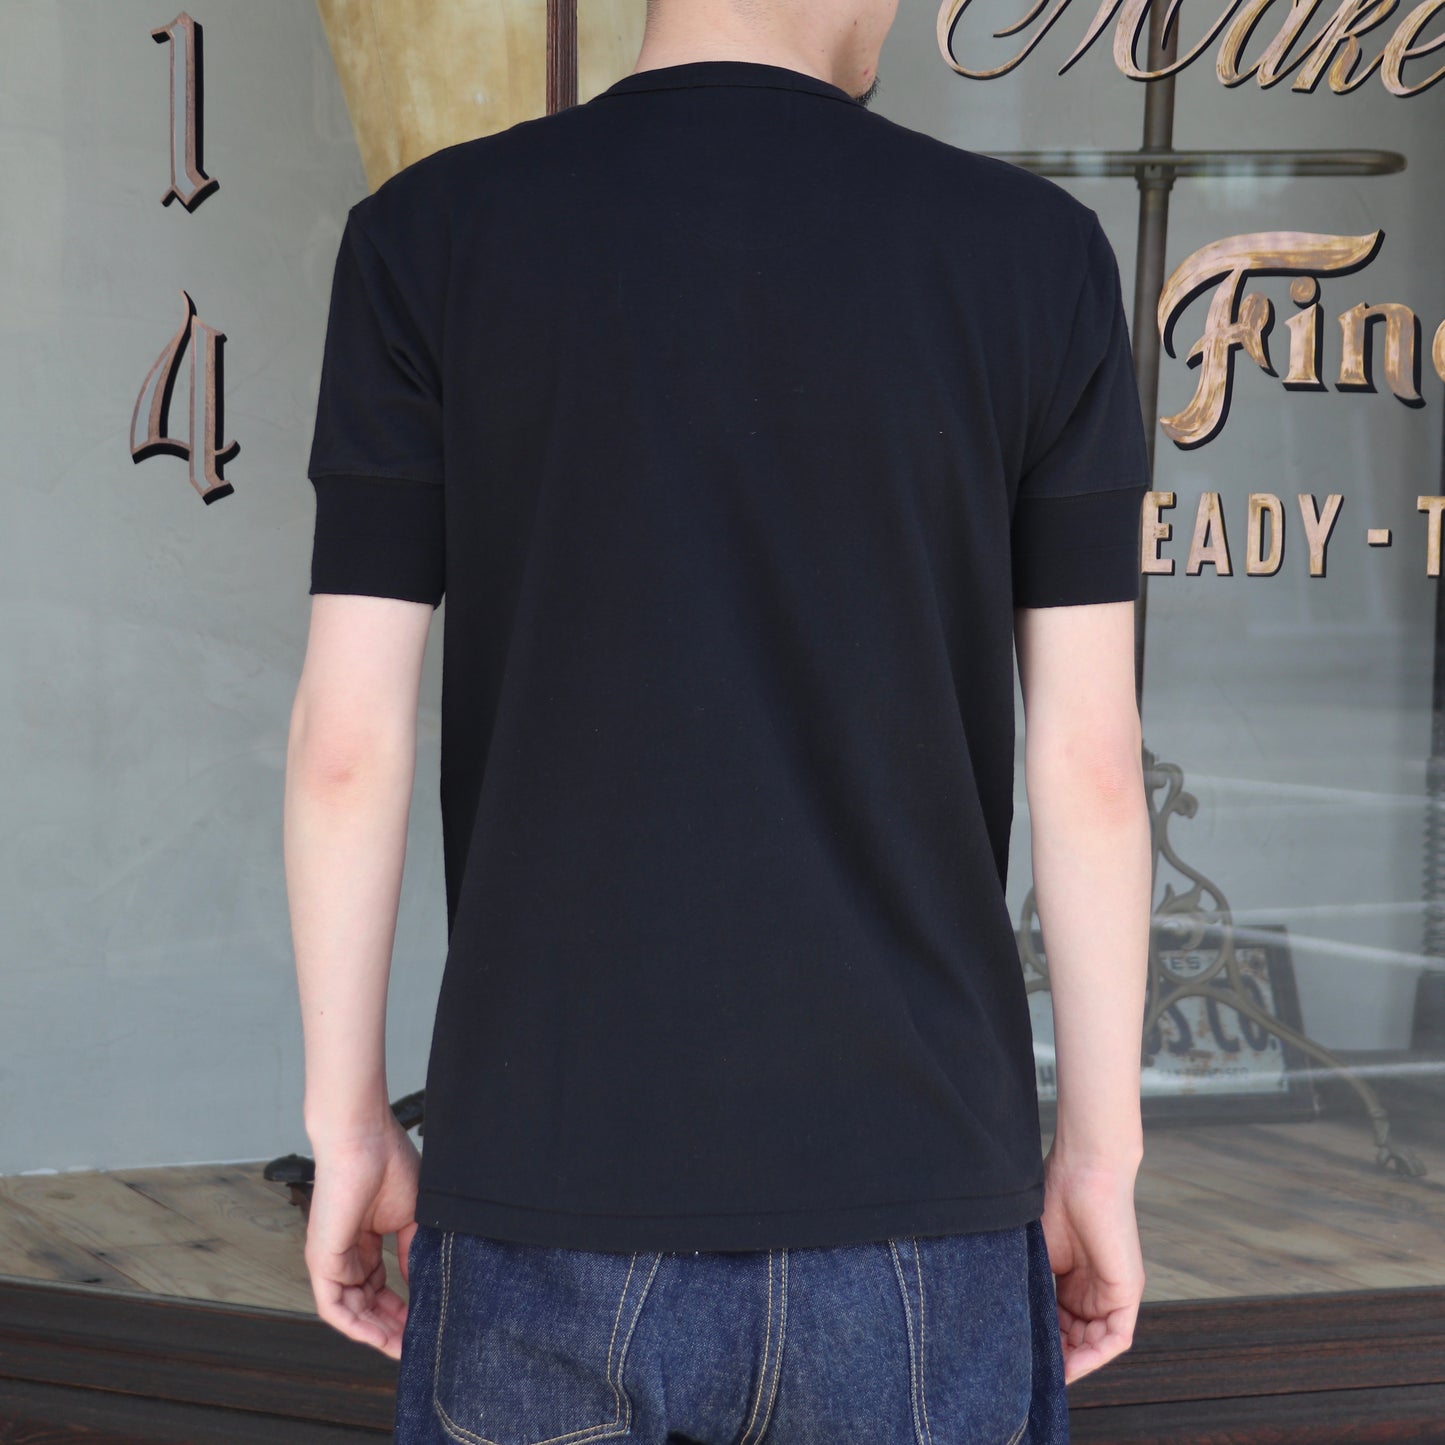 SHADOWS- S/S HENRY T-SHIRTS